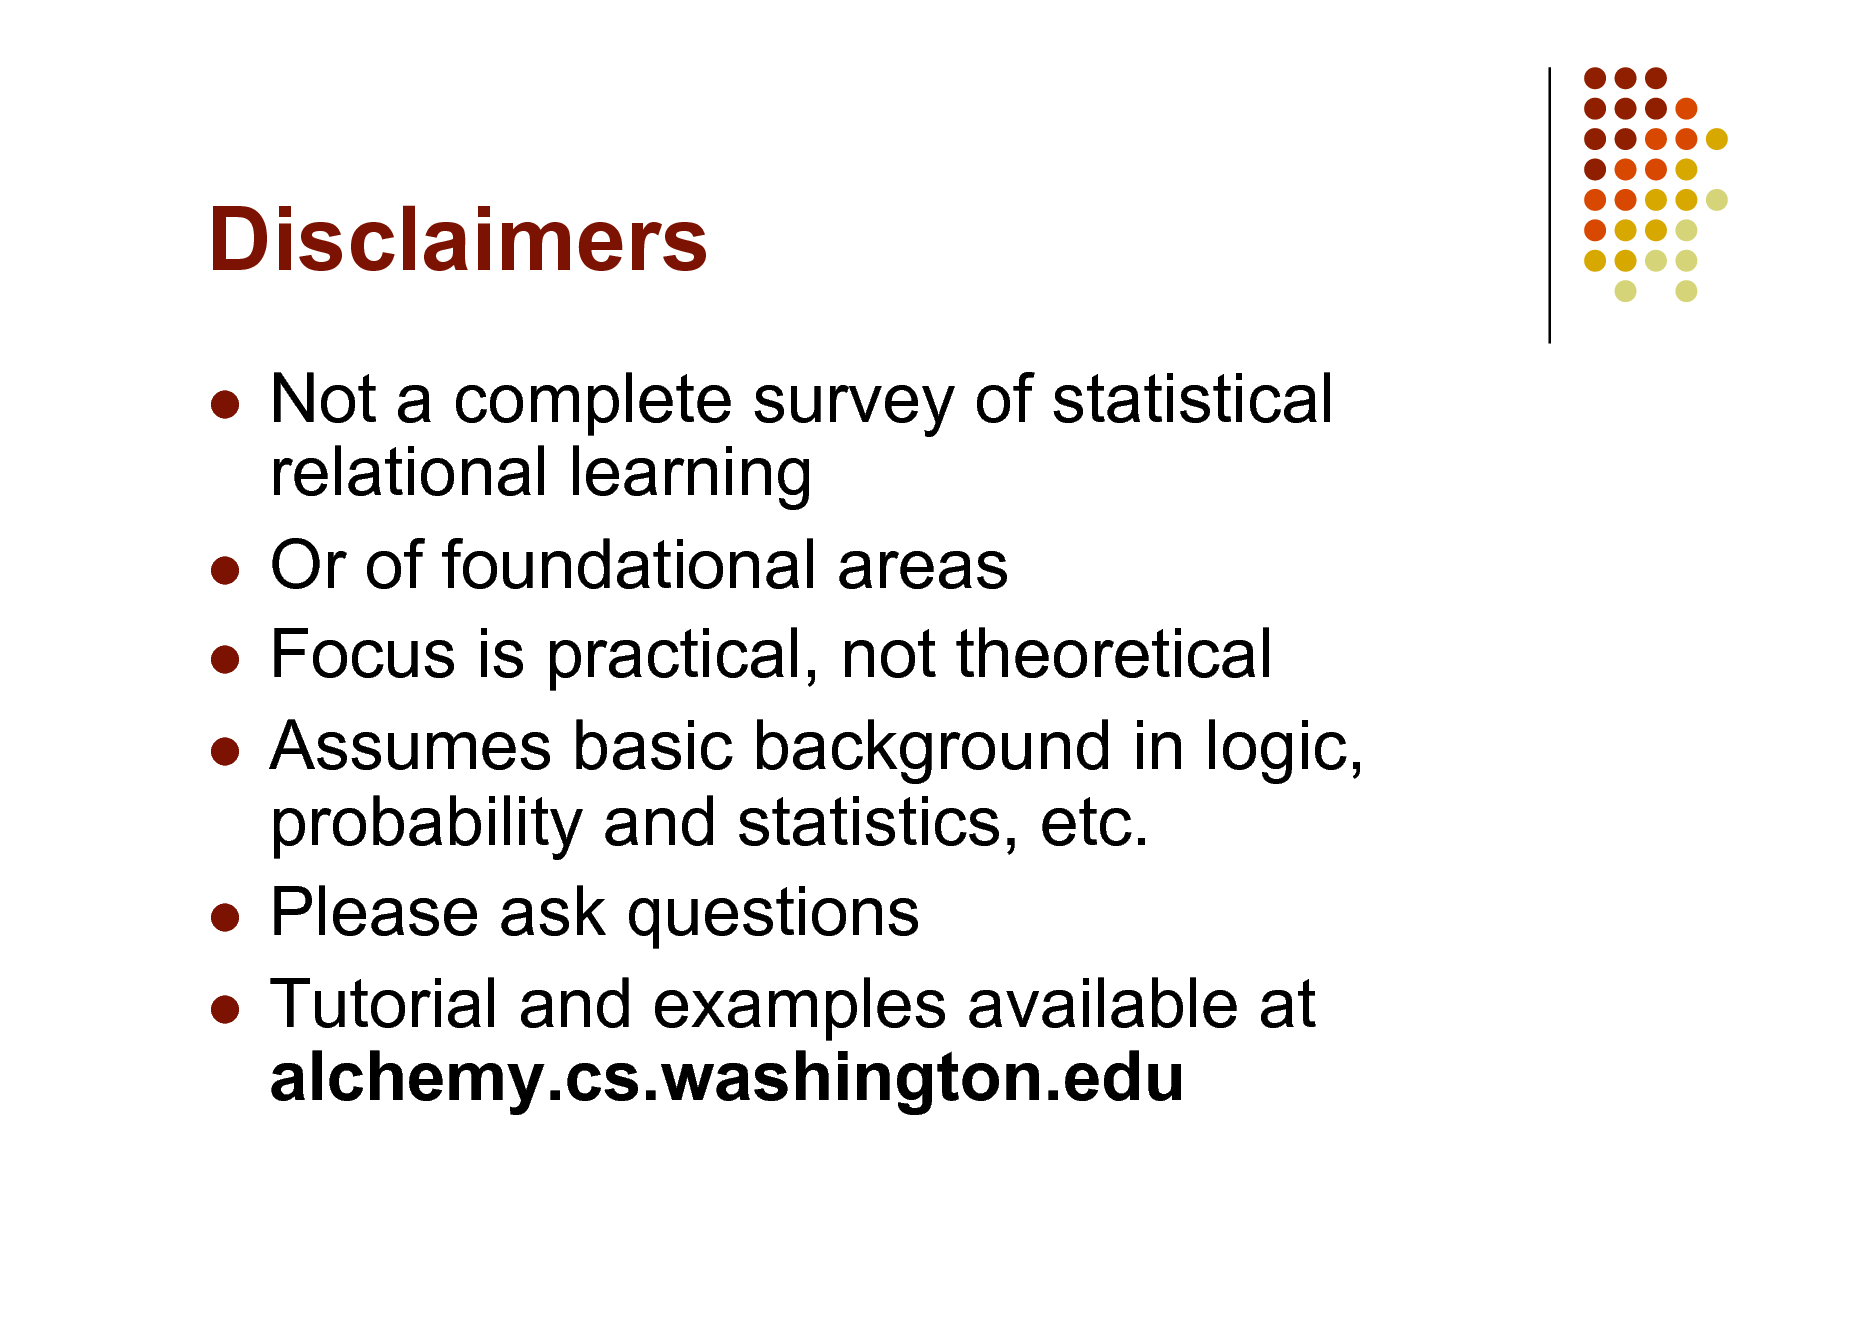 Slide: Disclaimers
Not a complete survey of statistical relational learning  Or of foundational areas  Focus is practical, not theoretical  Assumes basic background in logic, probability and statistics, etc.  Please ask questions  Tutorial and examples available at alchemy.cs.washington.edu


